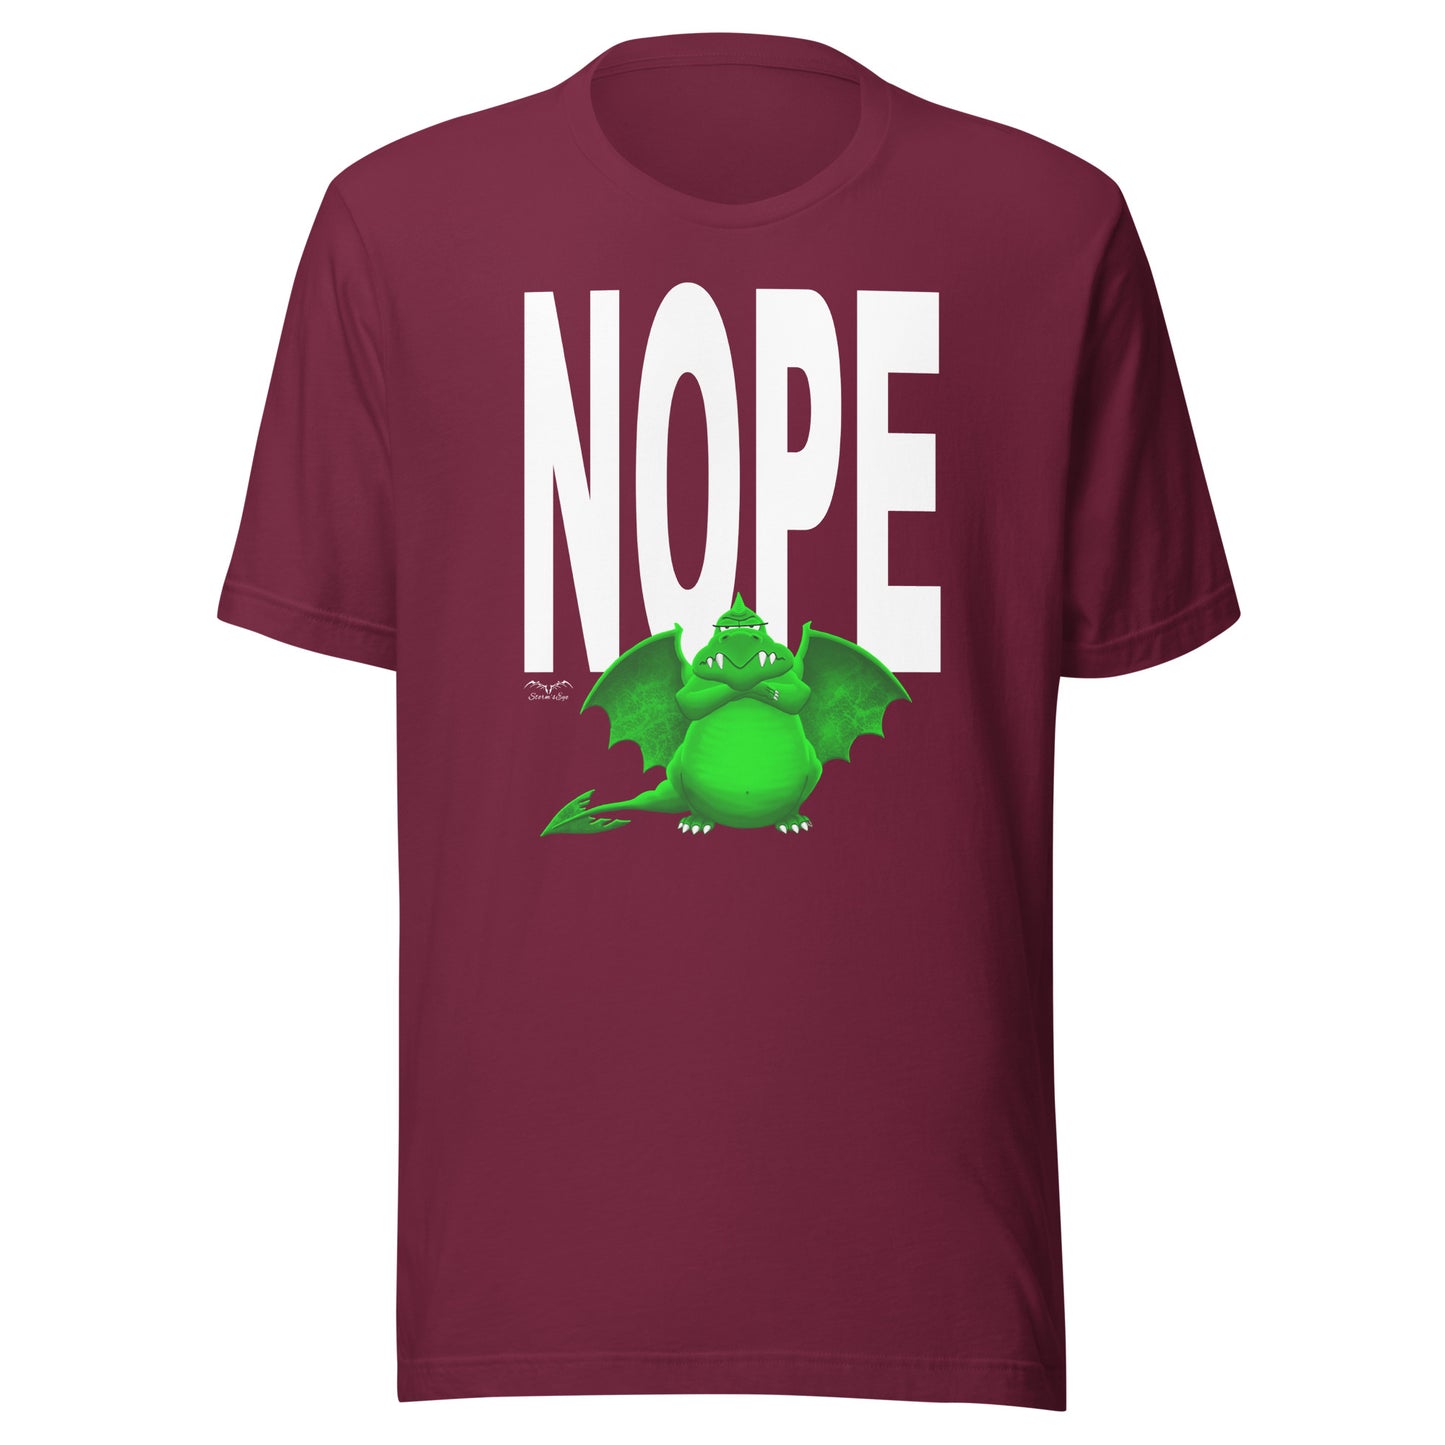 nope dragon bouncer t-shirt, wine red, by Stormseye Design